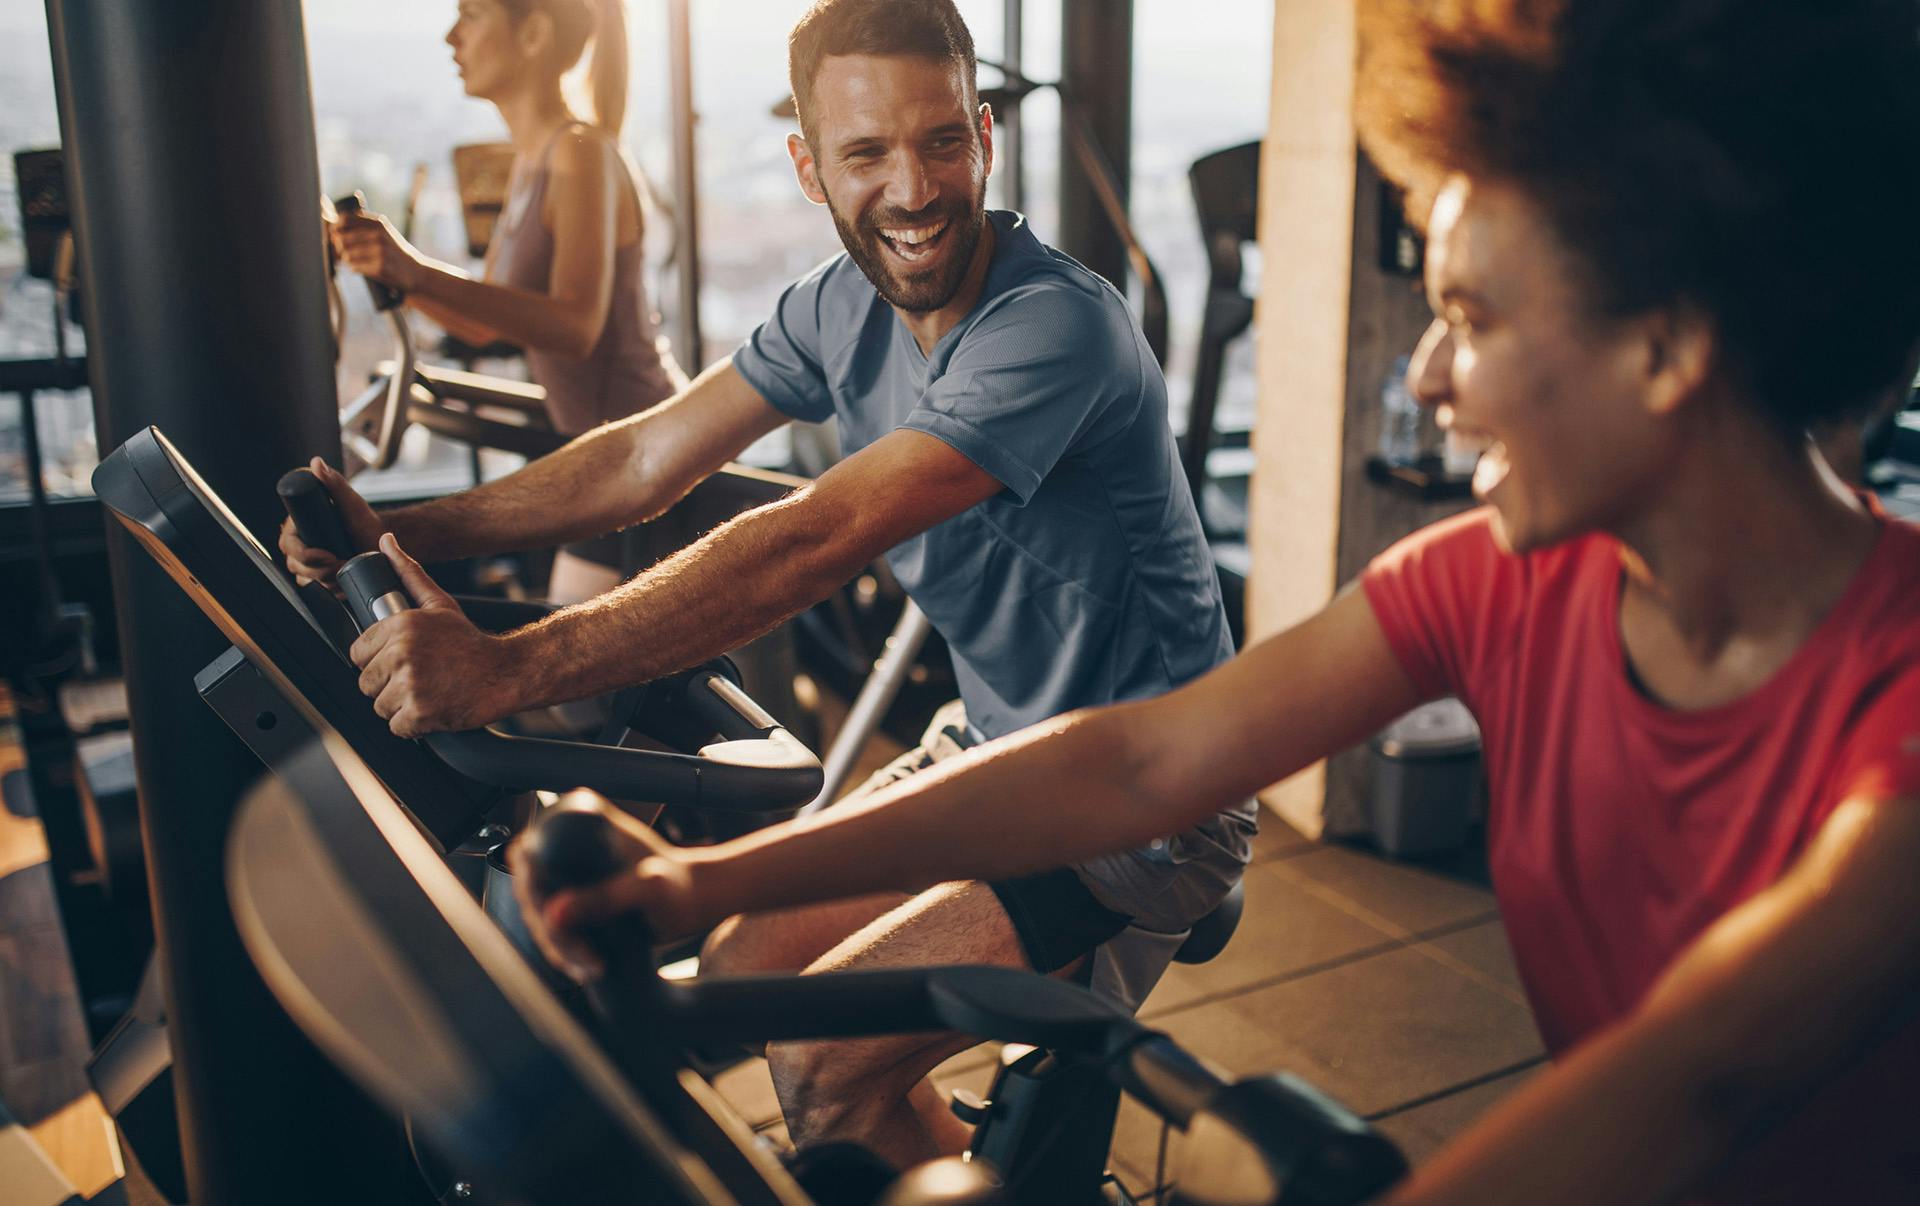 People smiling while using workout bikes.